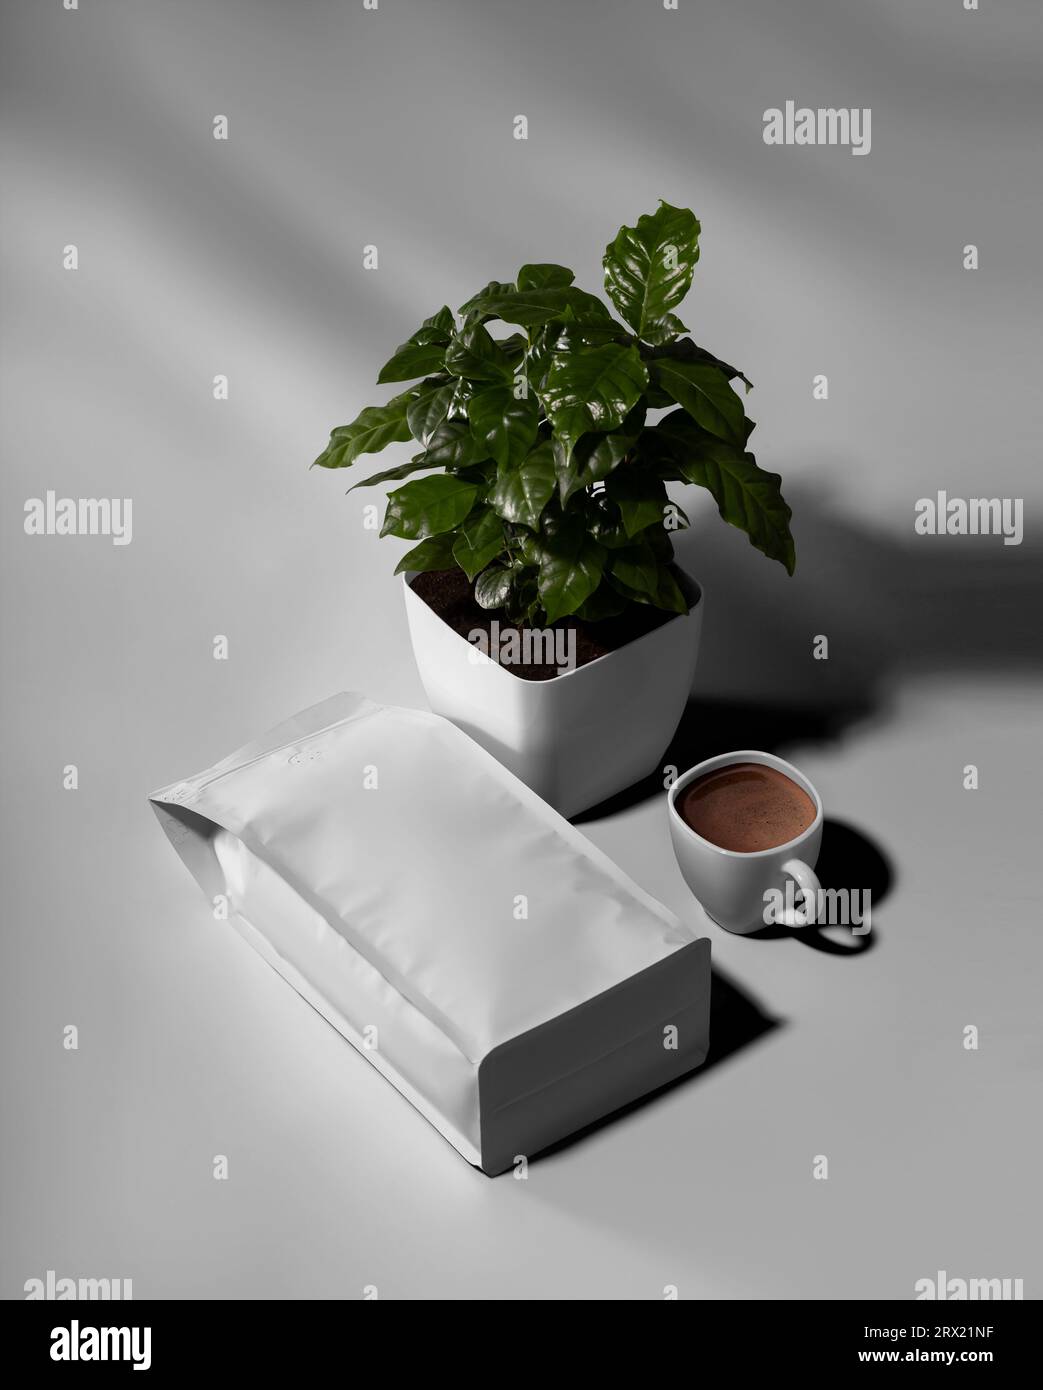 Template of a white pouch with shadows on the background, a cup of brewed coffee, an arabica tree in a pot. Product photography for advertising. Doy p Stock Photo